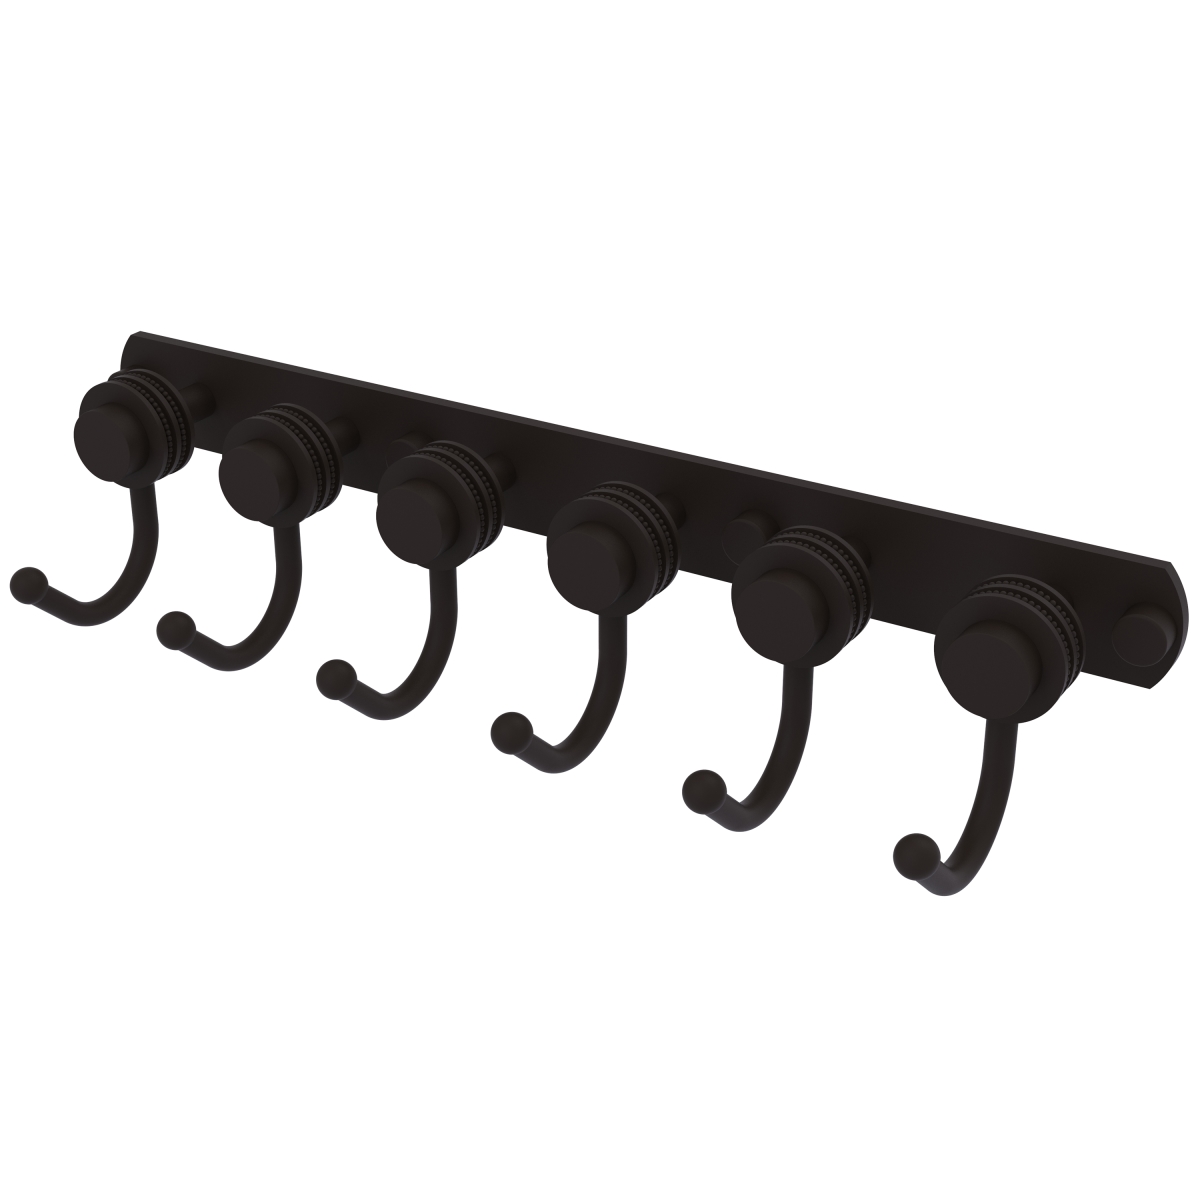 Allied Brass 920D-6-ORB Mercury Collection 6 Position Tie & Belt Rack with Dotted Accent, Oil Rubbed Bronze